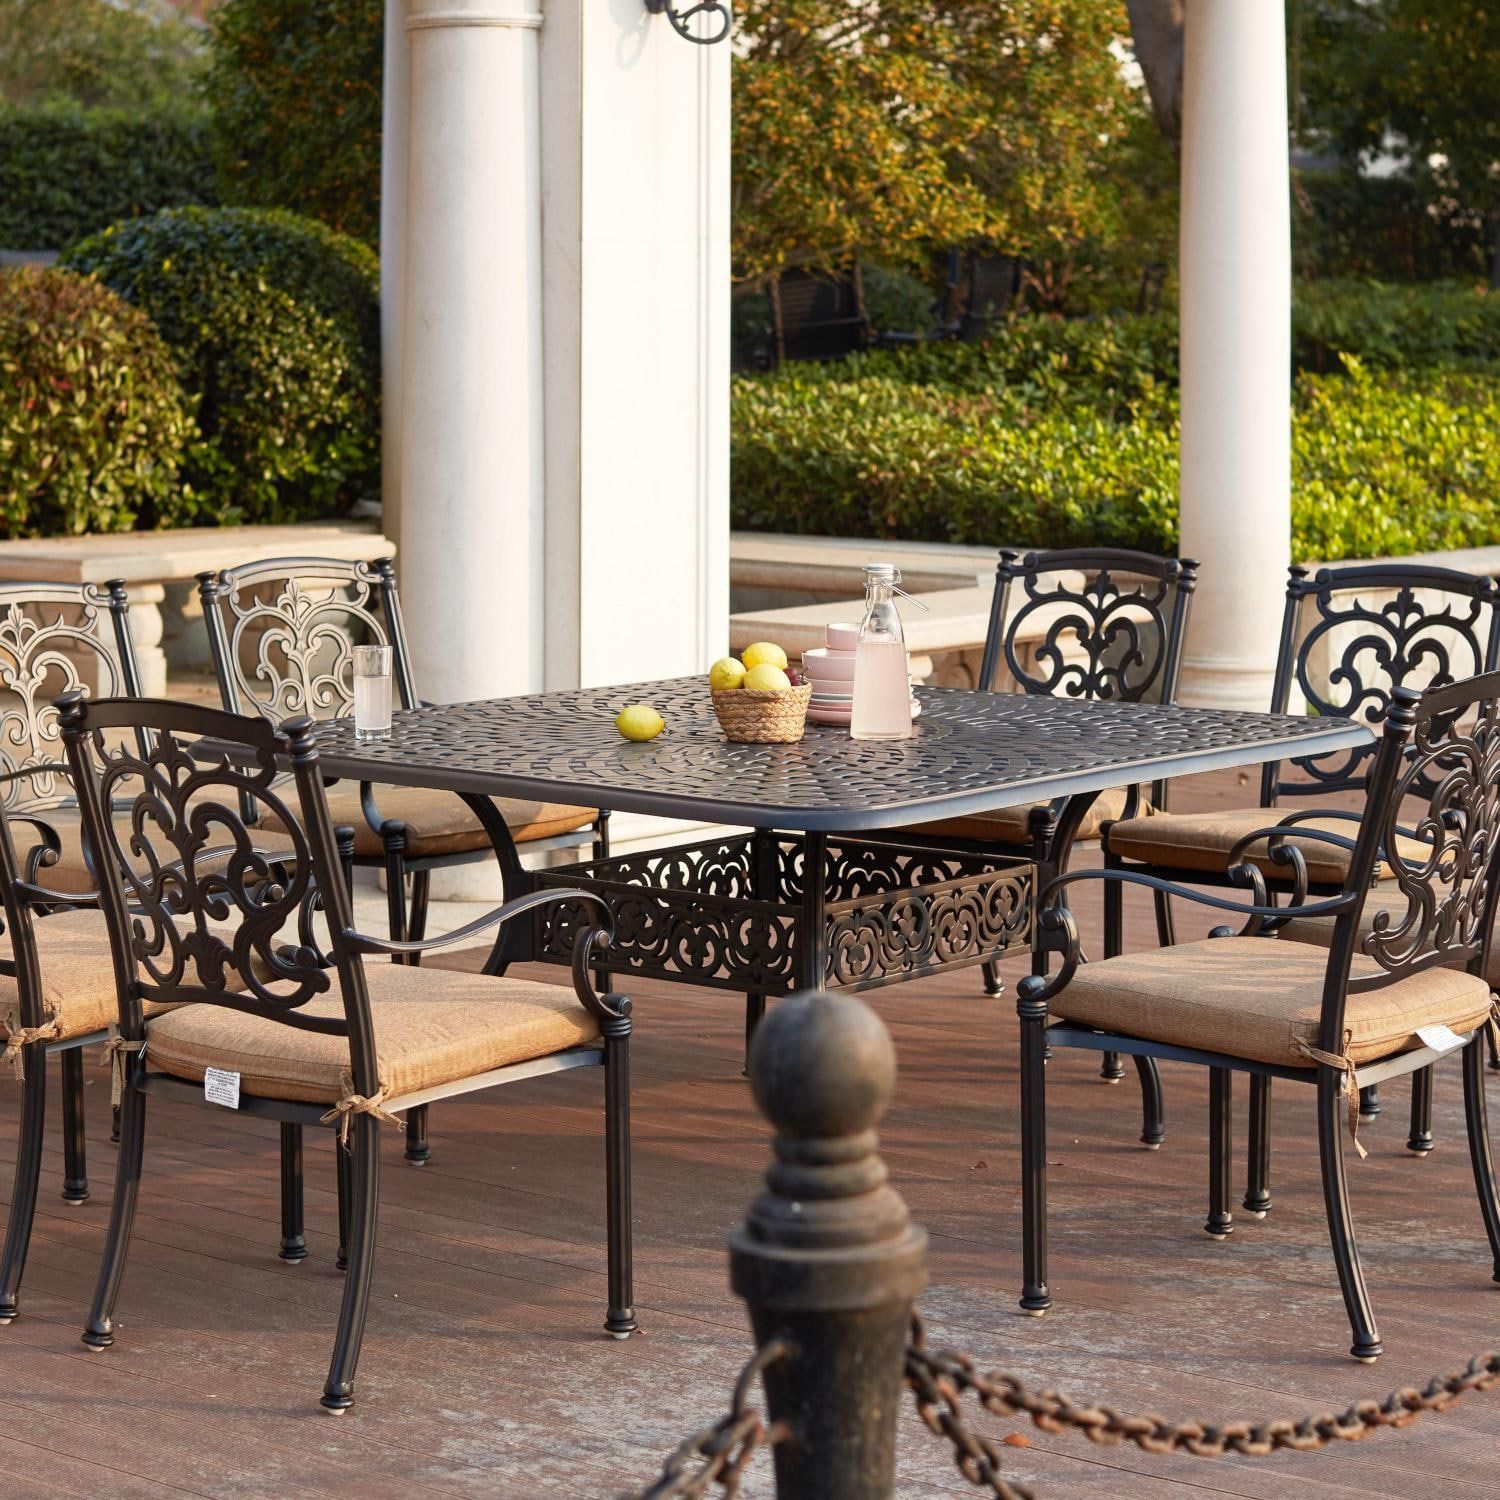 Darlee Santa Barbara 9 Piece Cast Aluminum Patio Dining Set With Square For 9 Piece Outdoor Square Dining Sets (View 7 of 15)